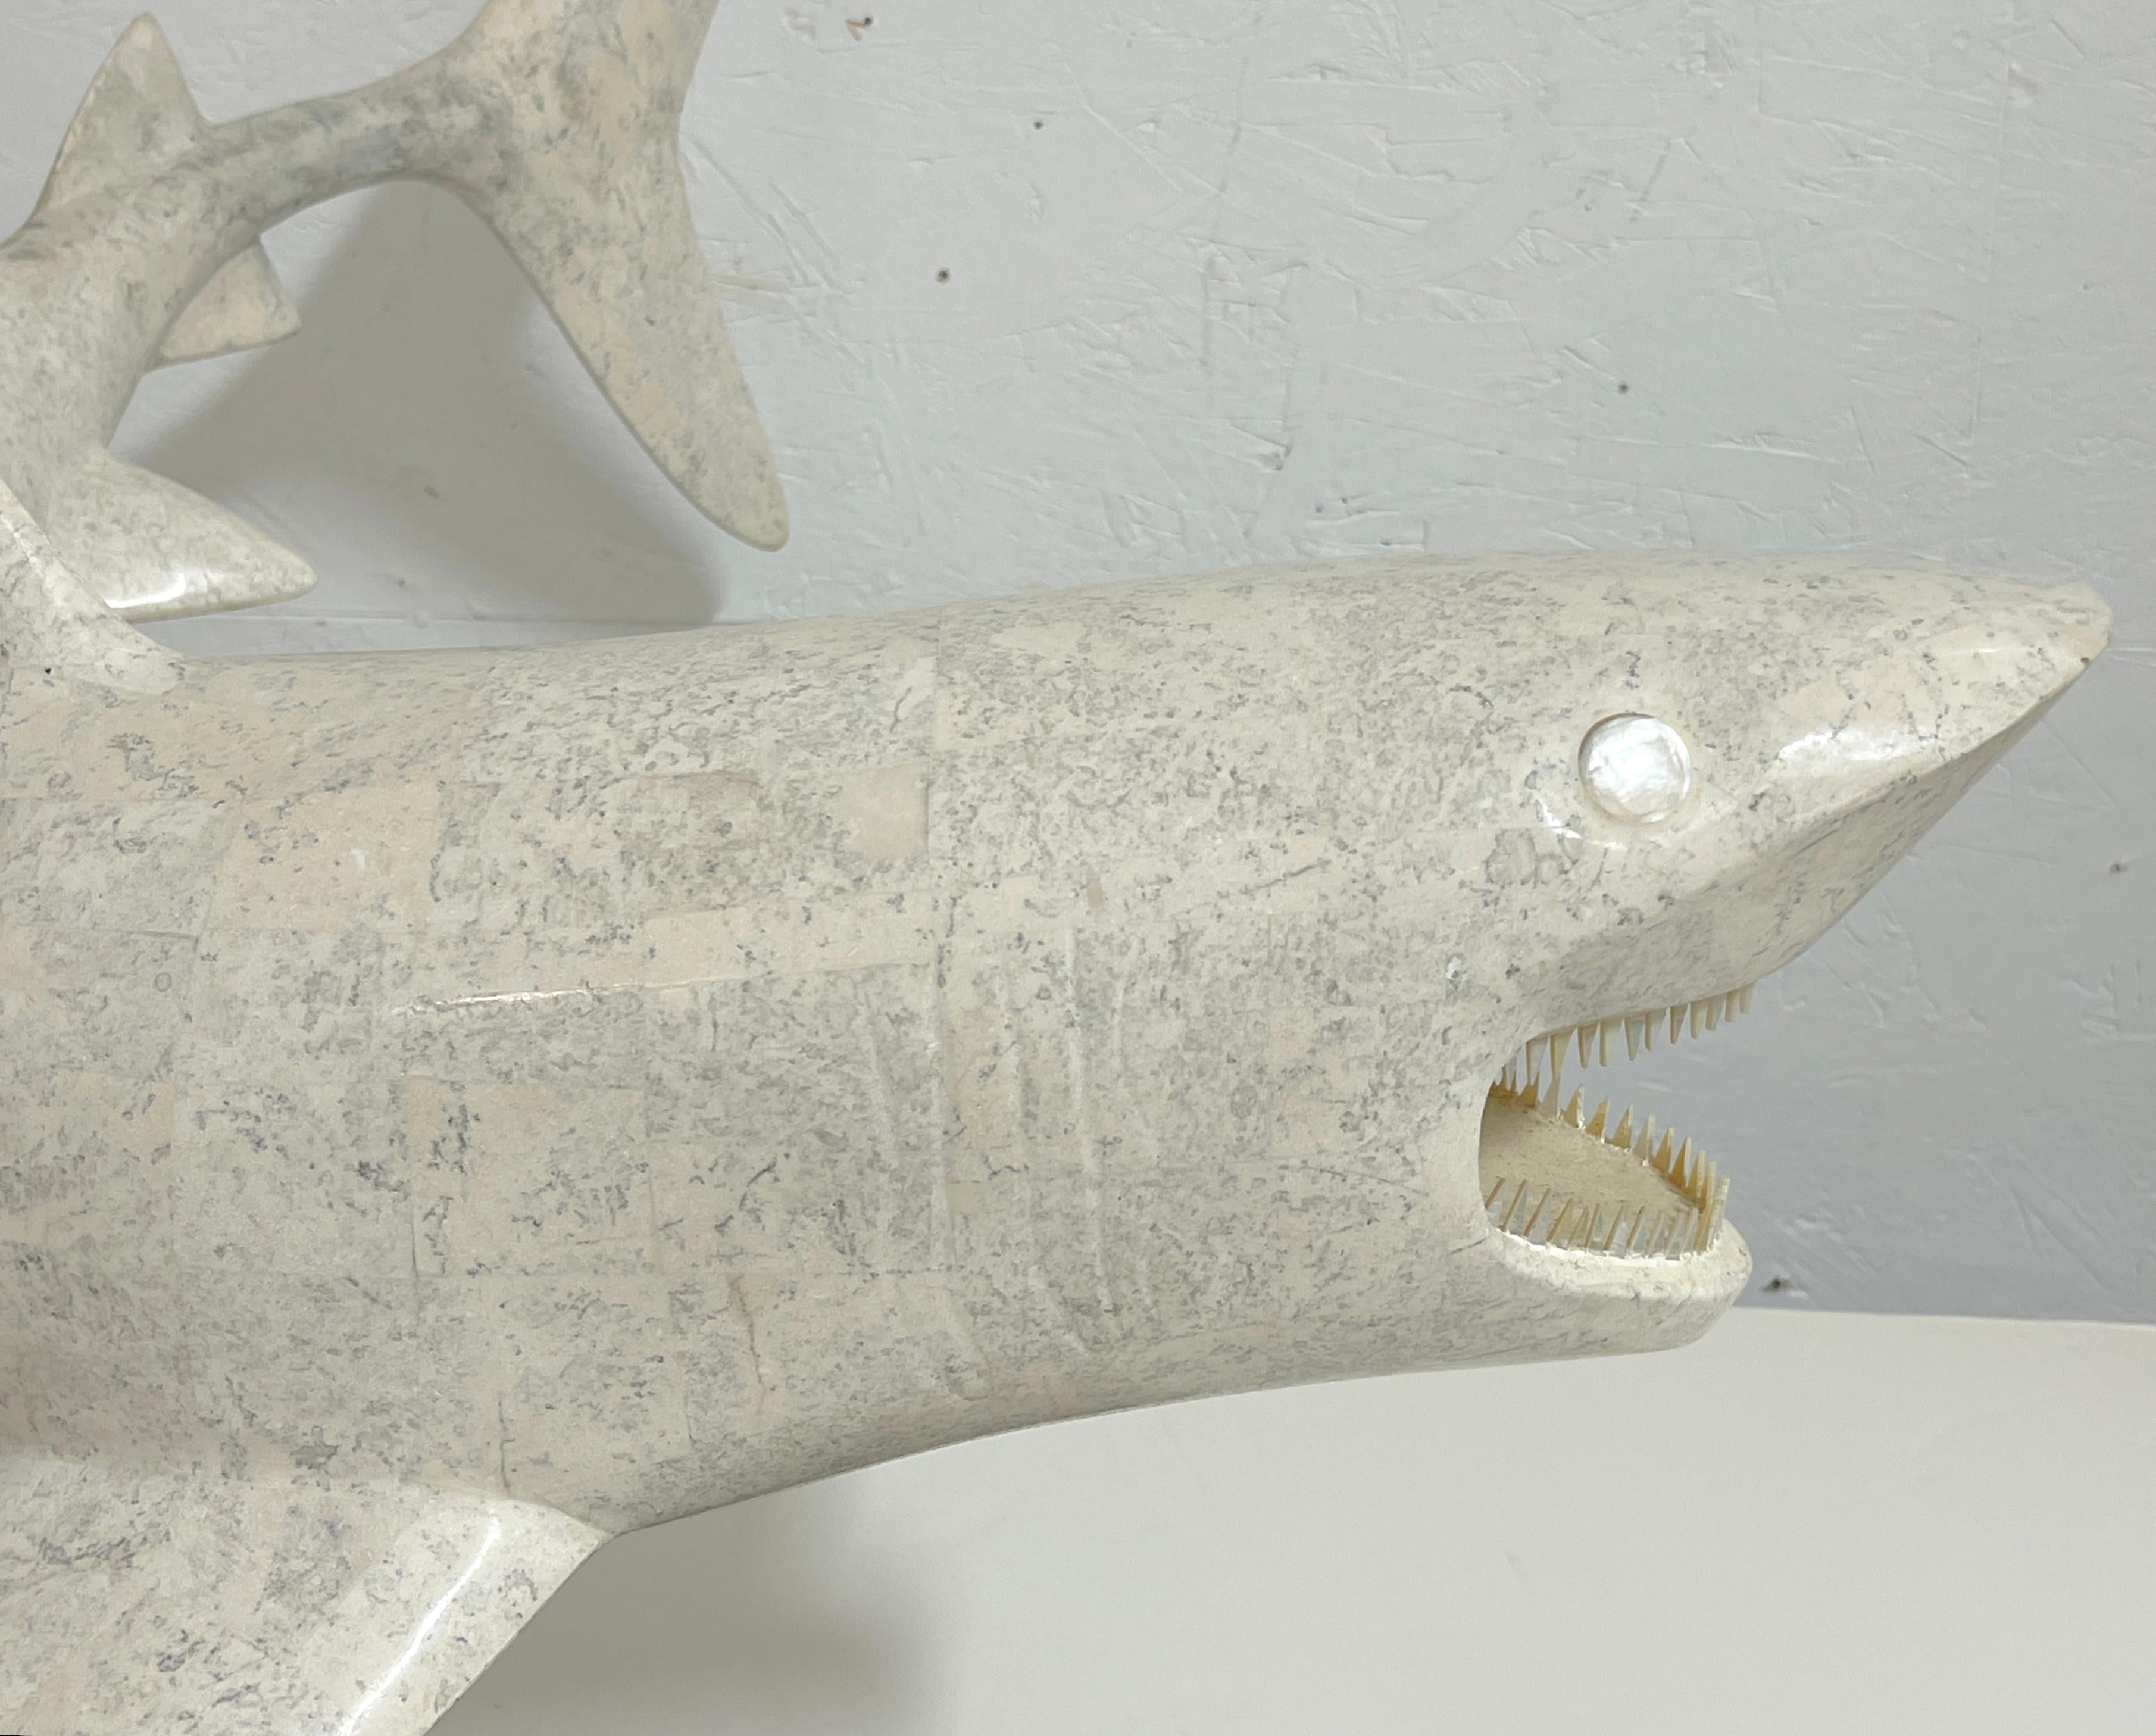 Large Modern Inlaid Tessellated Stone Sculpture of a Great White Shark   For Sale 4